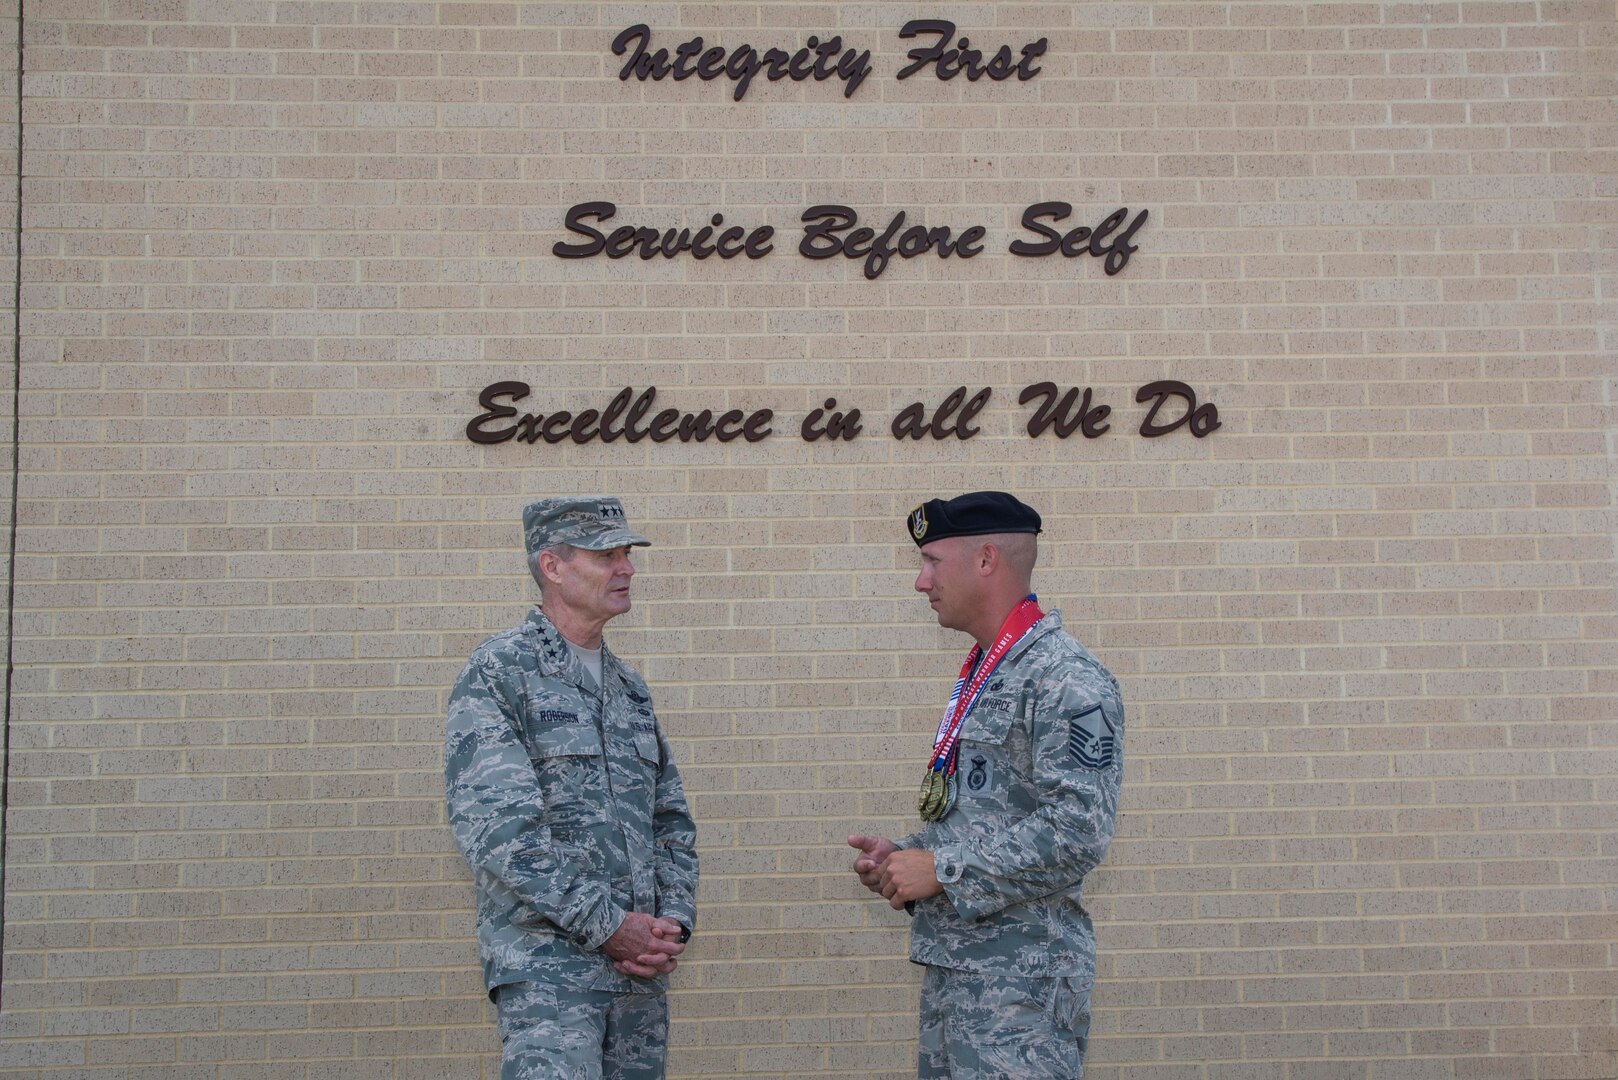 Master Sgt. Benjamin Seekell, a 343rd Training Squadron security forces instructor, received a warm welcome from a familiar face from his 2011 Afghanistan deployment: Lt. Gen. Darryl Roberson, commander of Air Education and Training Command. Seekell recently returned back to Joint Base San Antonio-Lackland from the 2017 Department of Defense Warrior Games having earned eight medals.